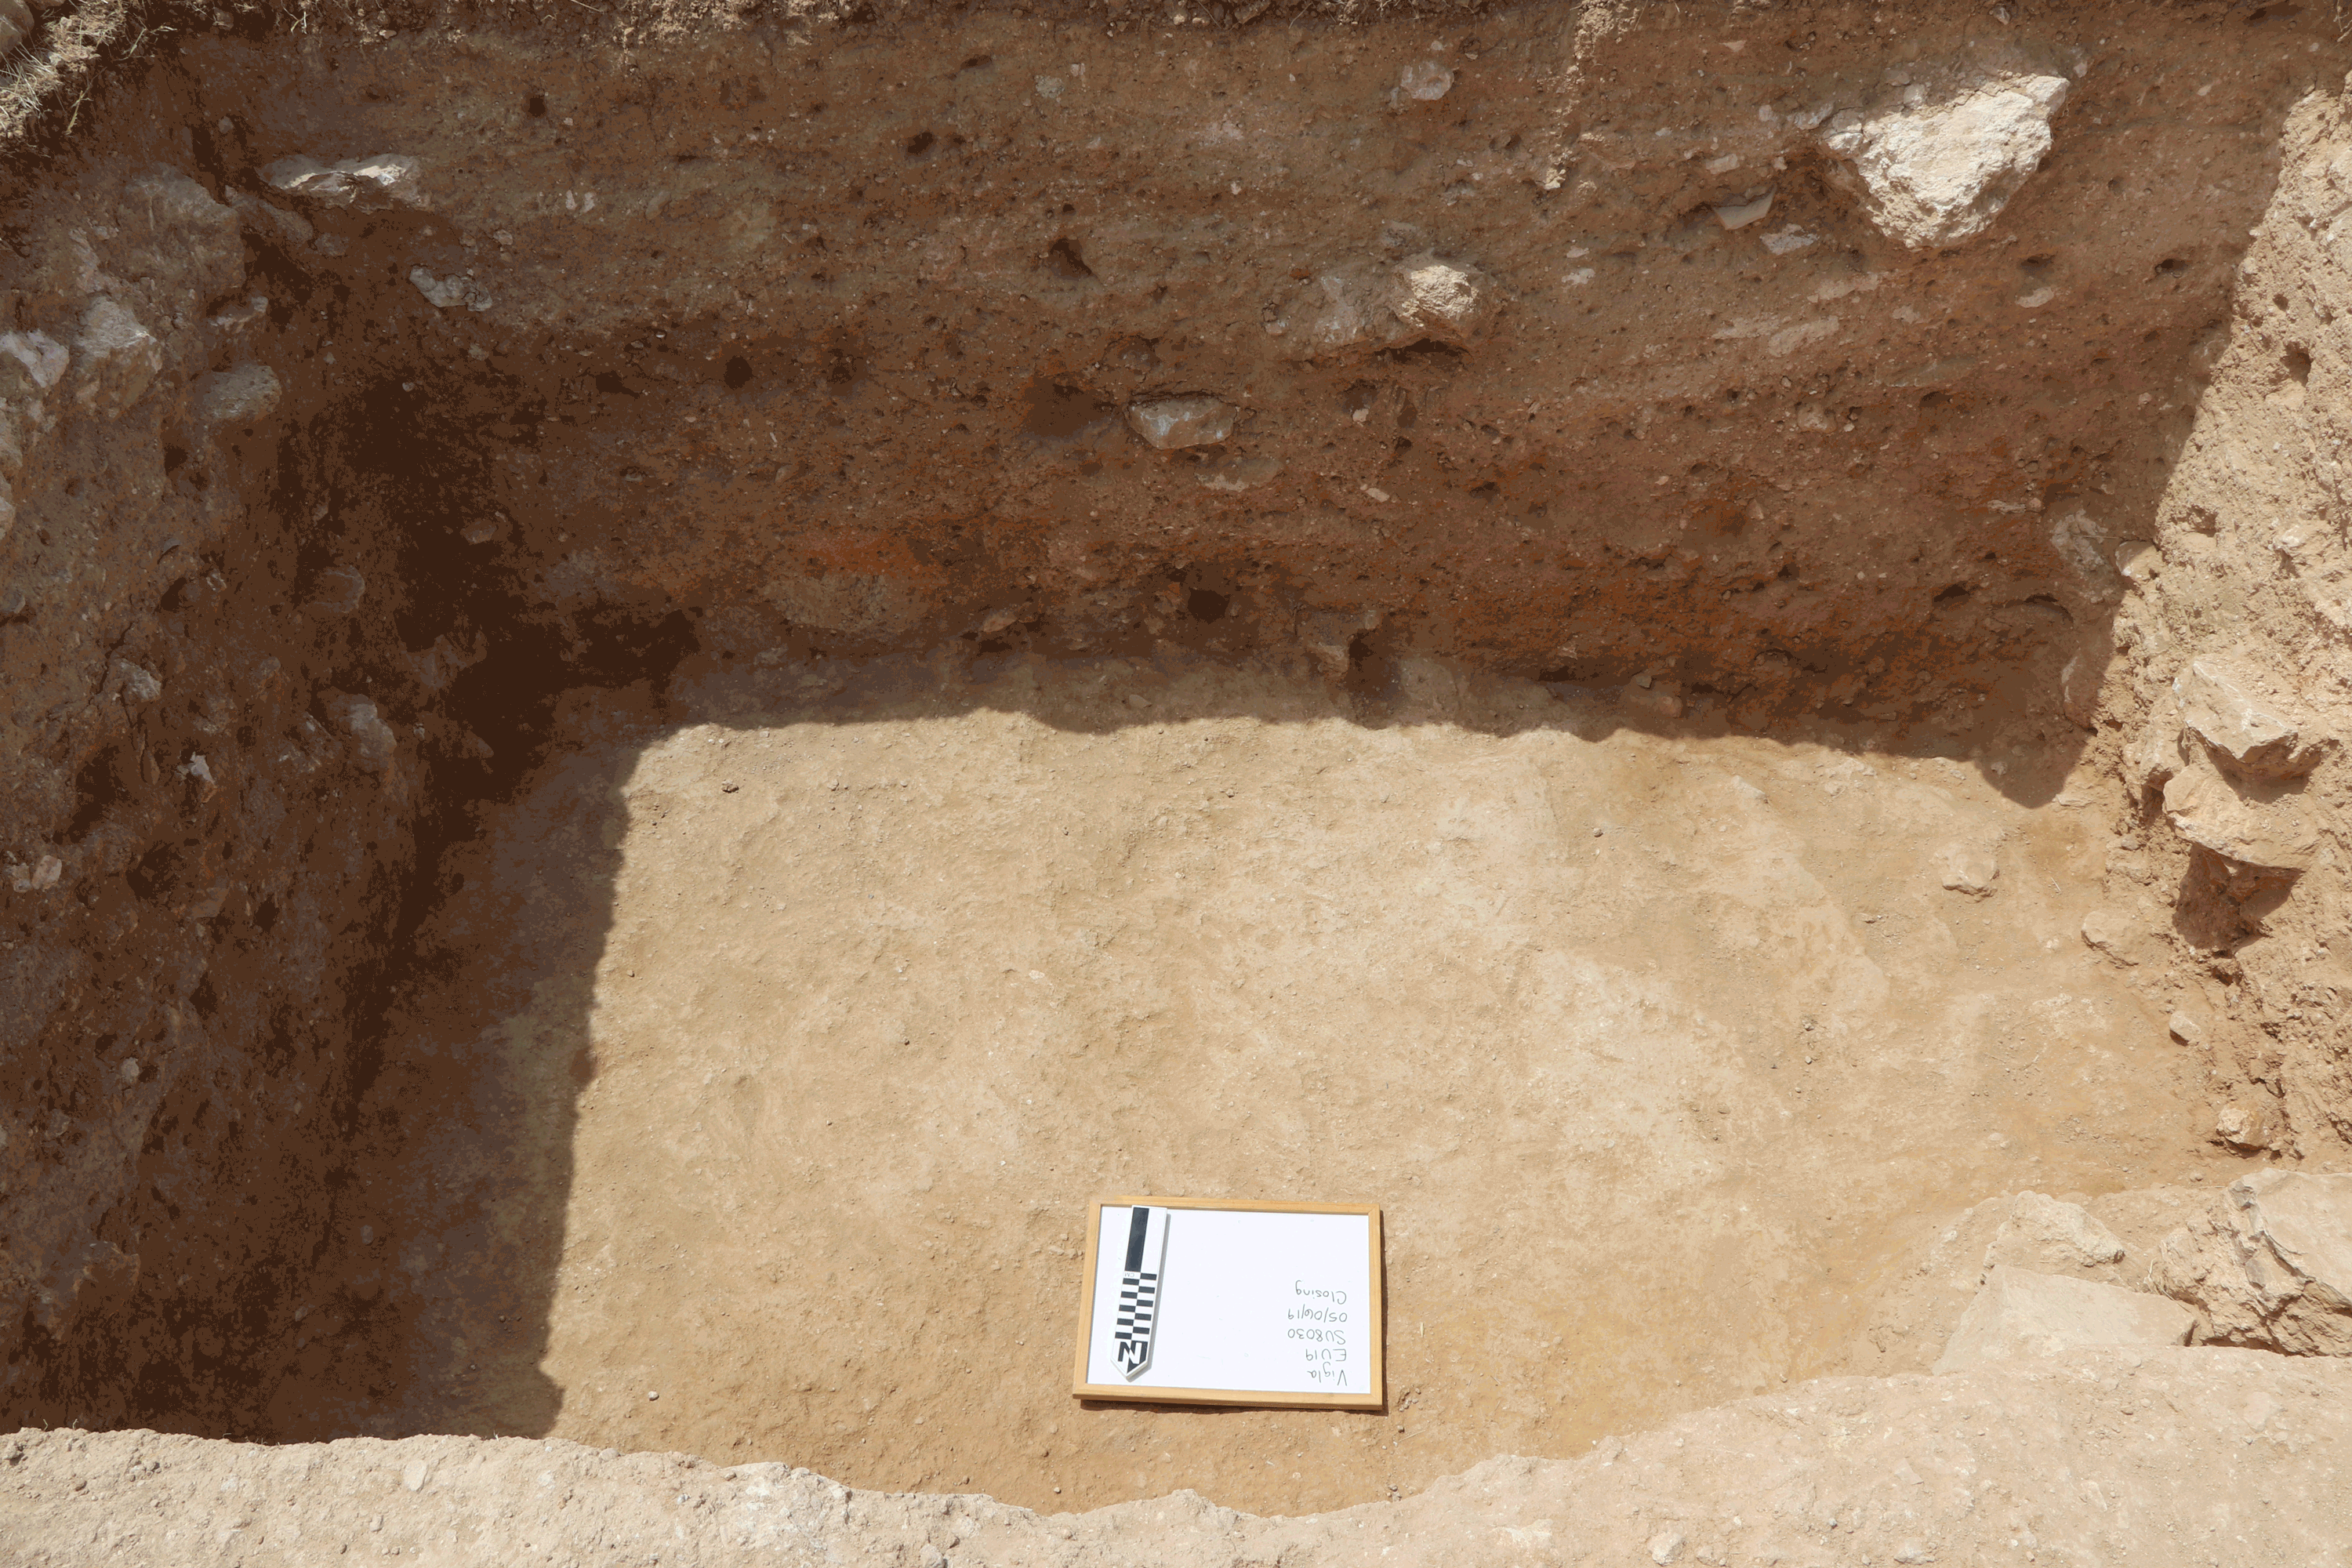 GIF showing a pit in the ground with many labeled mudbricks.